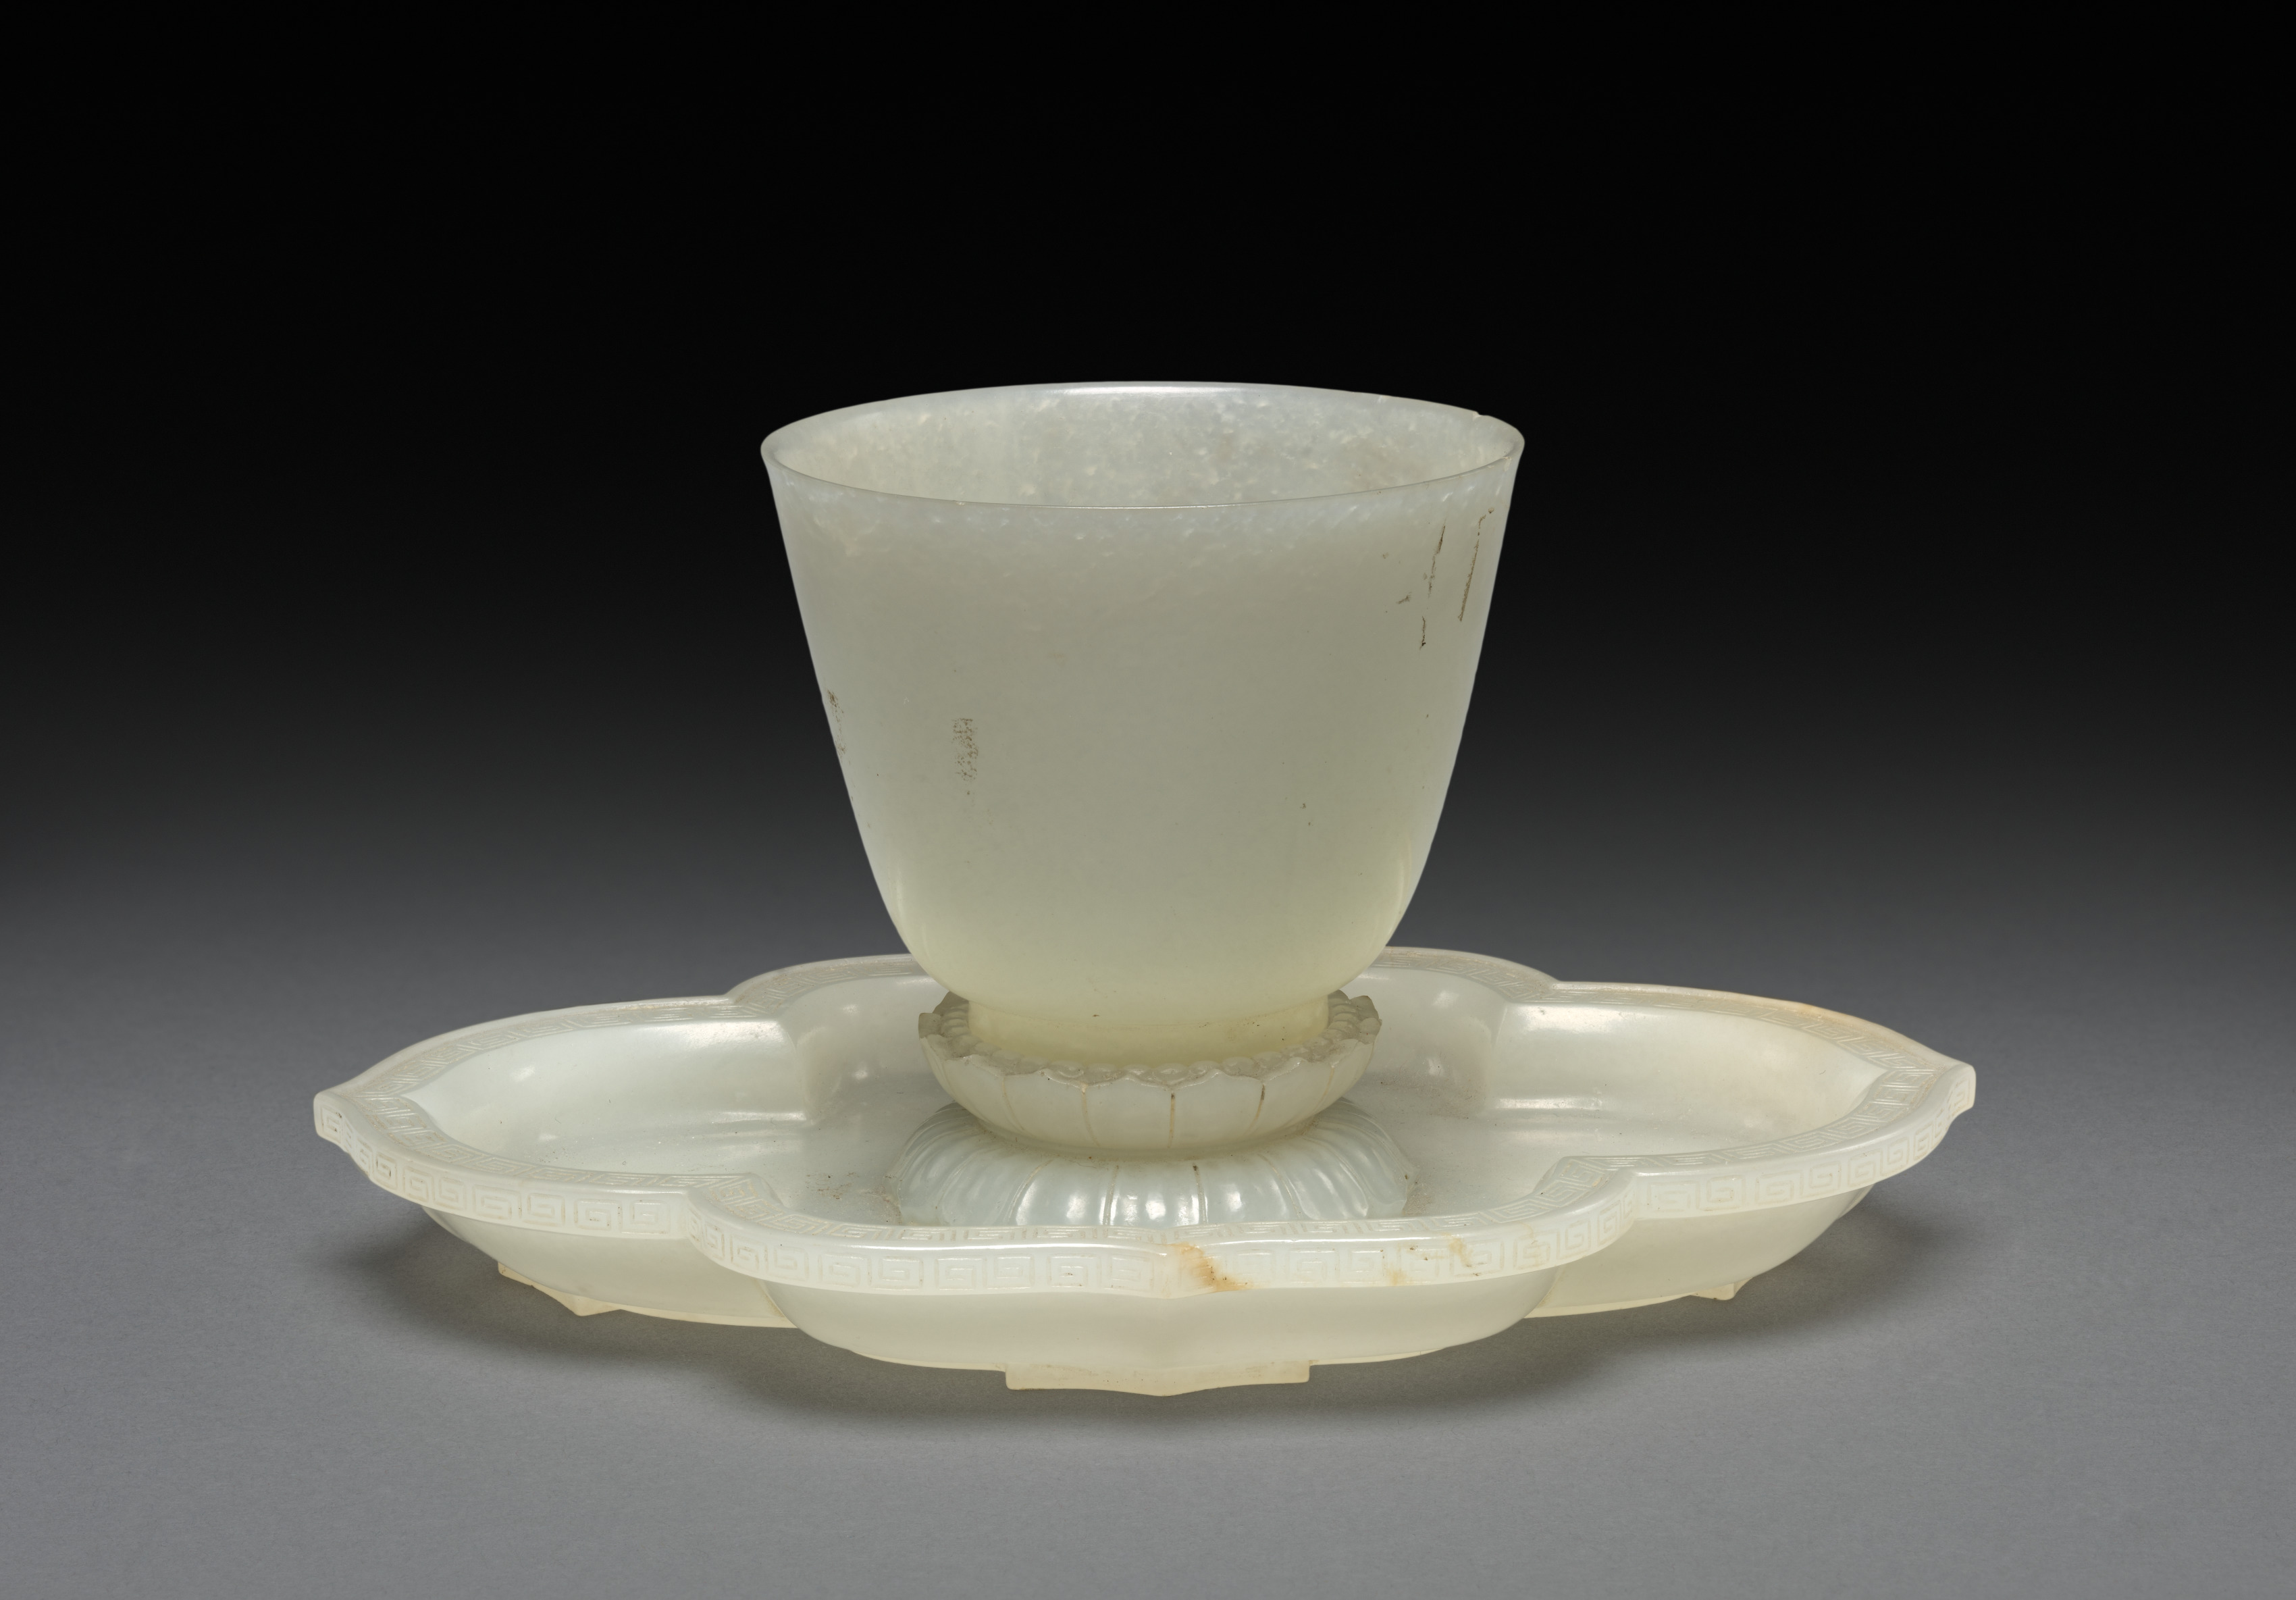 Lotus-shaped Dish and Cup